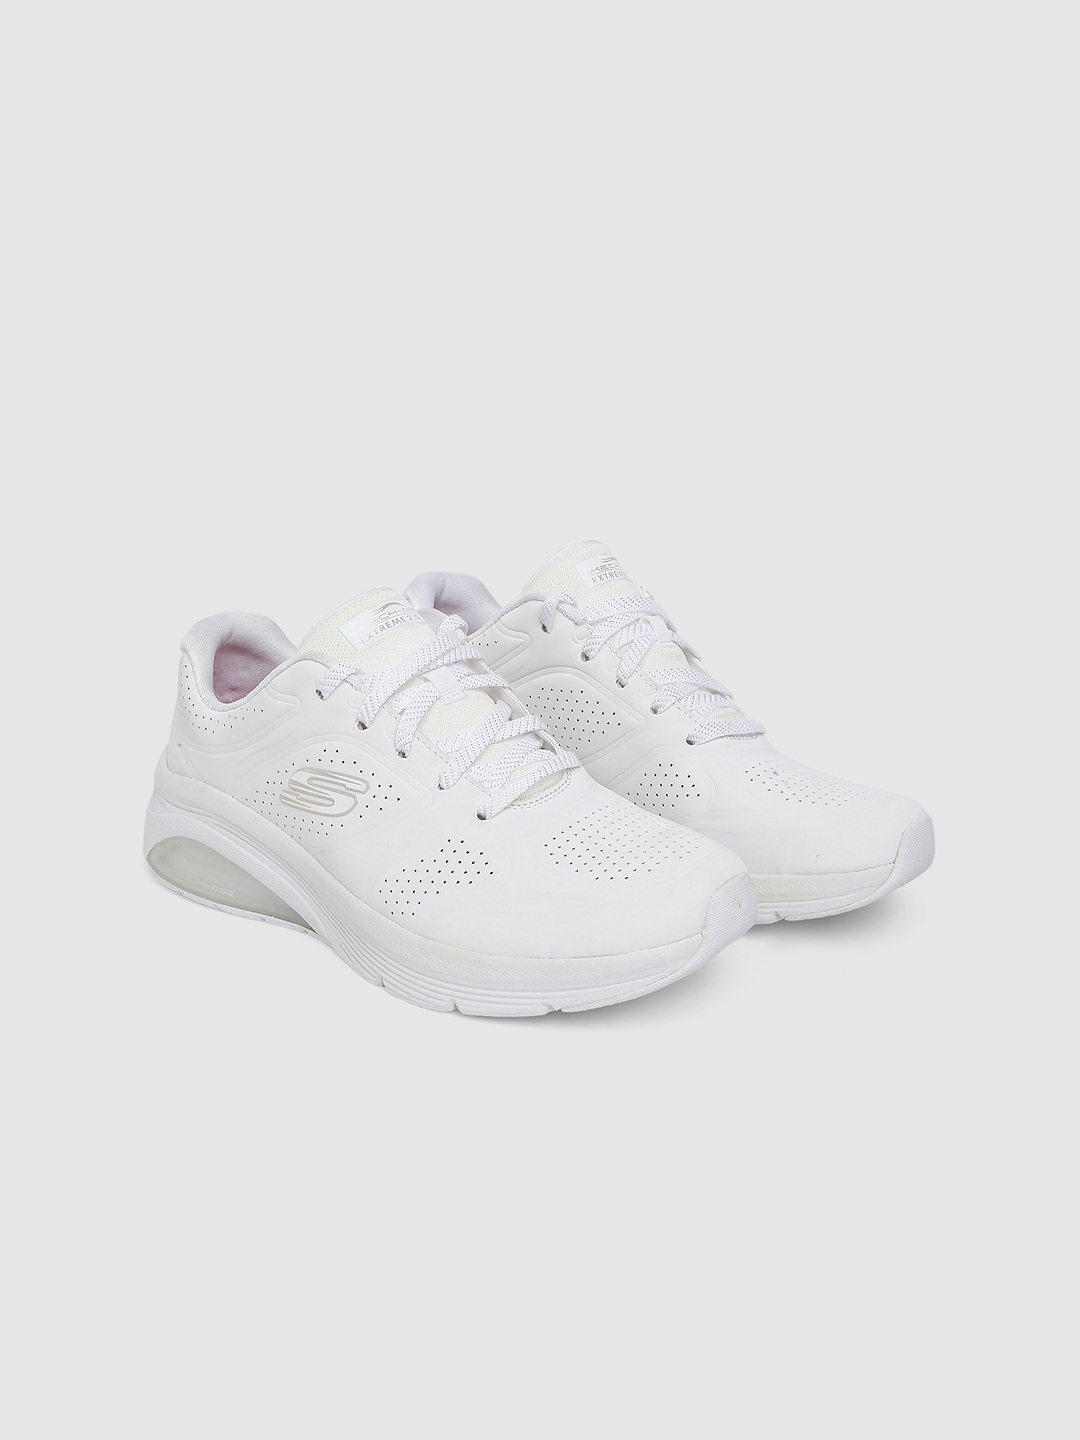 Skechers Women White Solid Casual Shoes Price in India